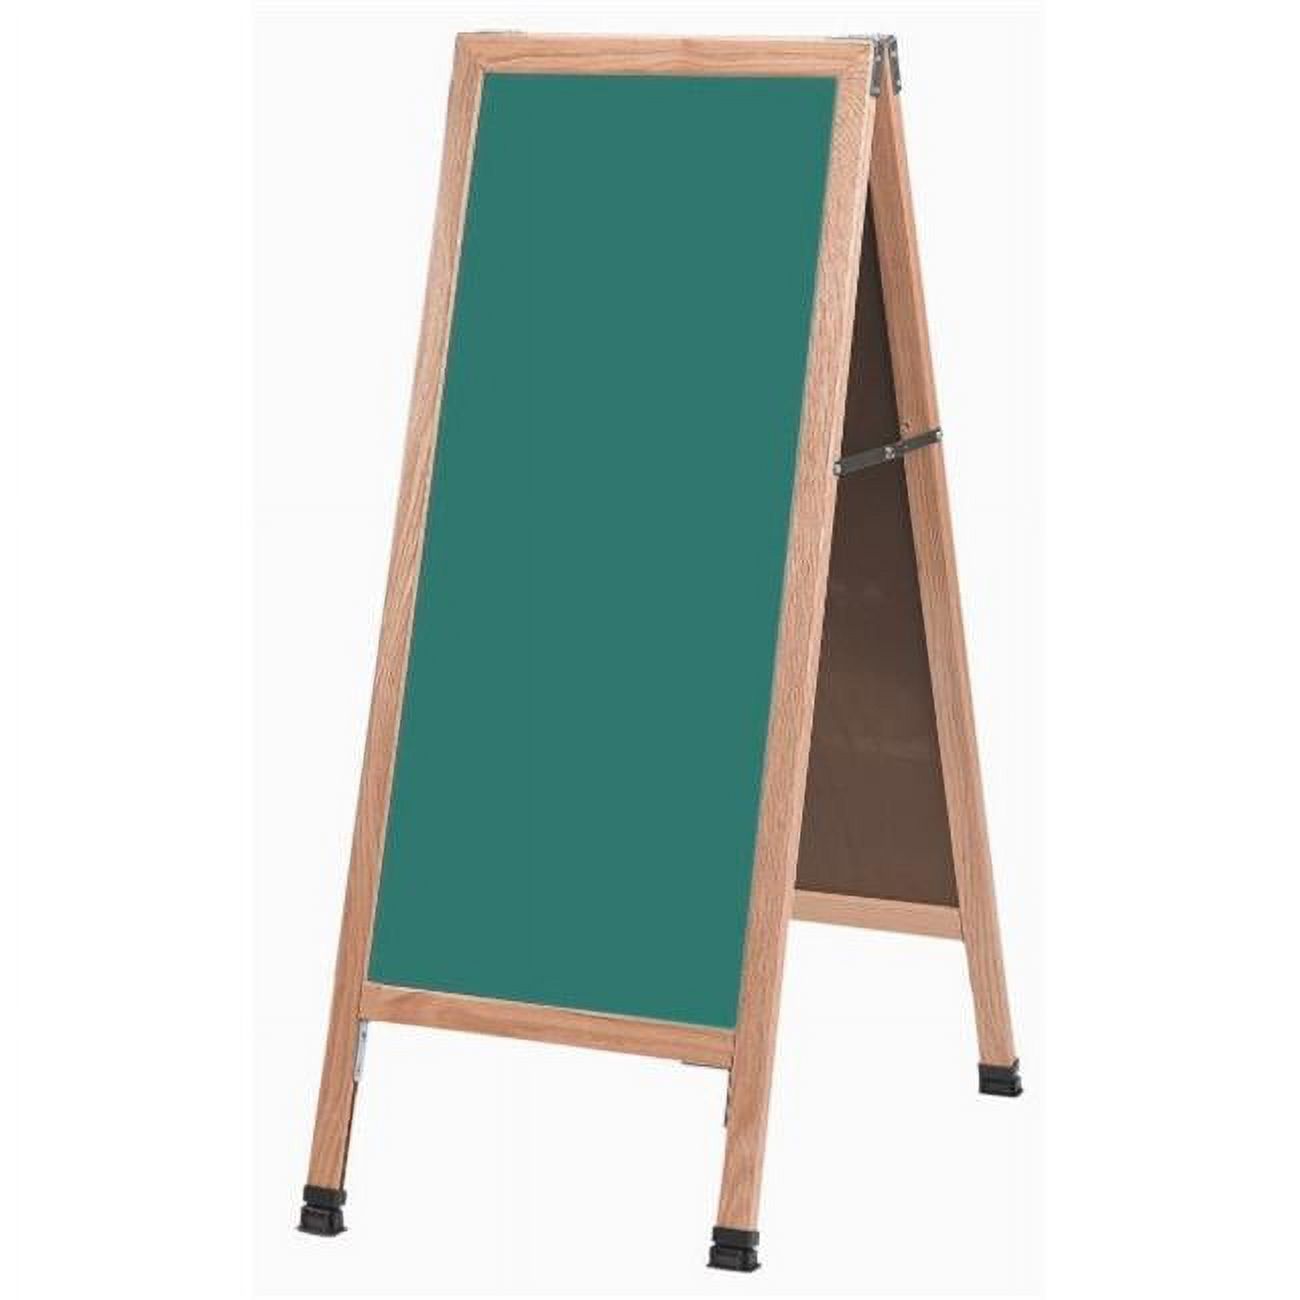 Aarco Products  Inc. A-311SG A-Frame Sidewalk Board Features a Green Porcelain Chalkboard and Solid Red Oak Frame with a Clear Lacquer Finish. Size 42 in.Hx18 in.W - image 1 of 1